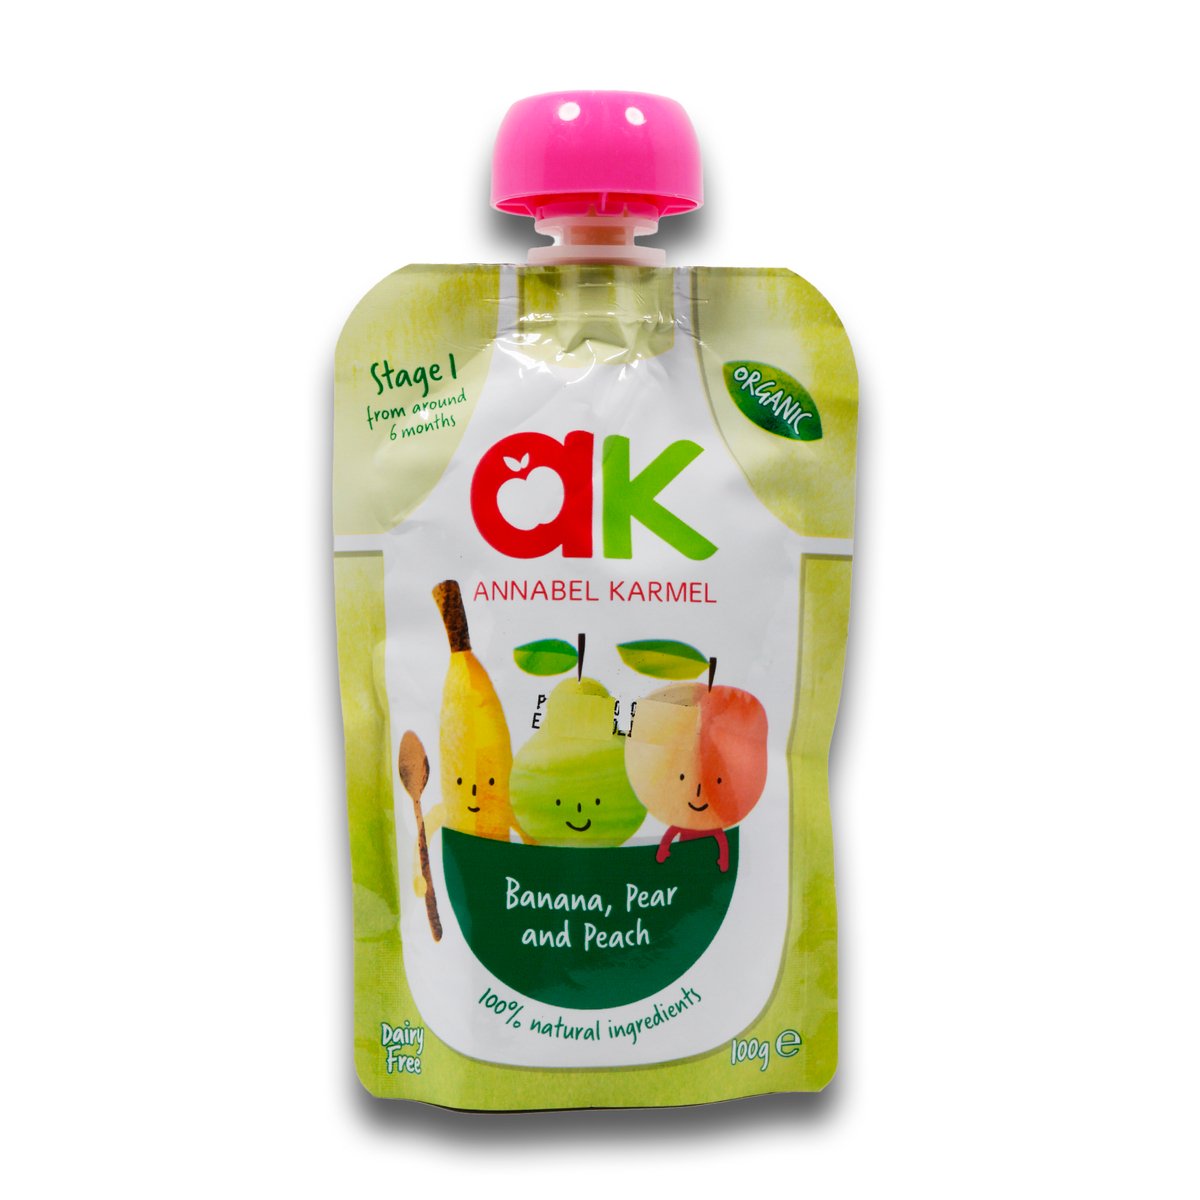 Annabel Karmel Baby Food Organic Banana, Pear & Peach Stage 1 From 6 Months 100g